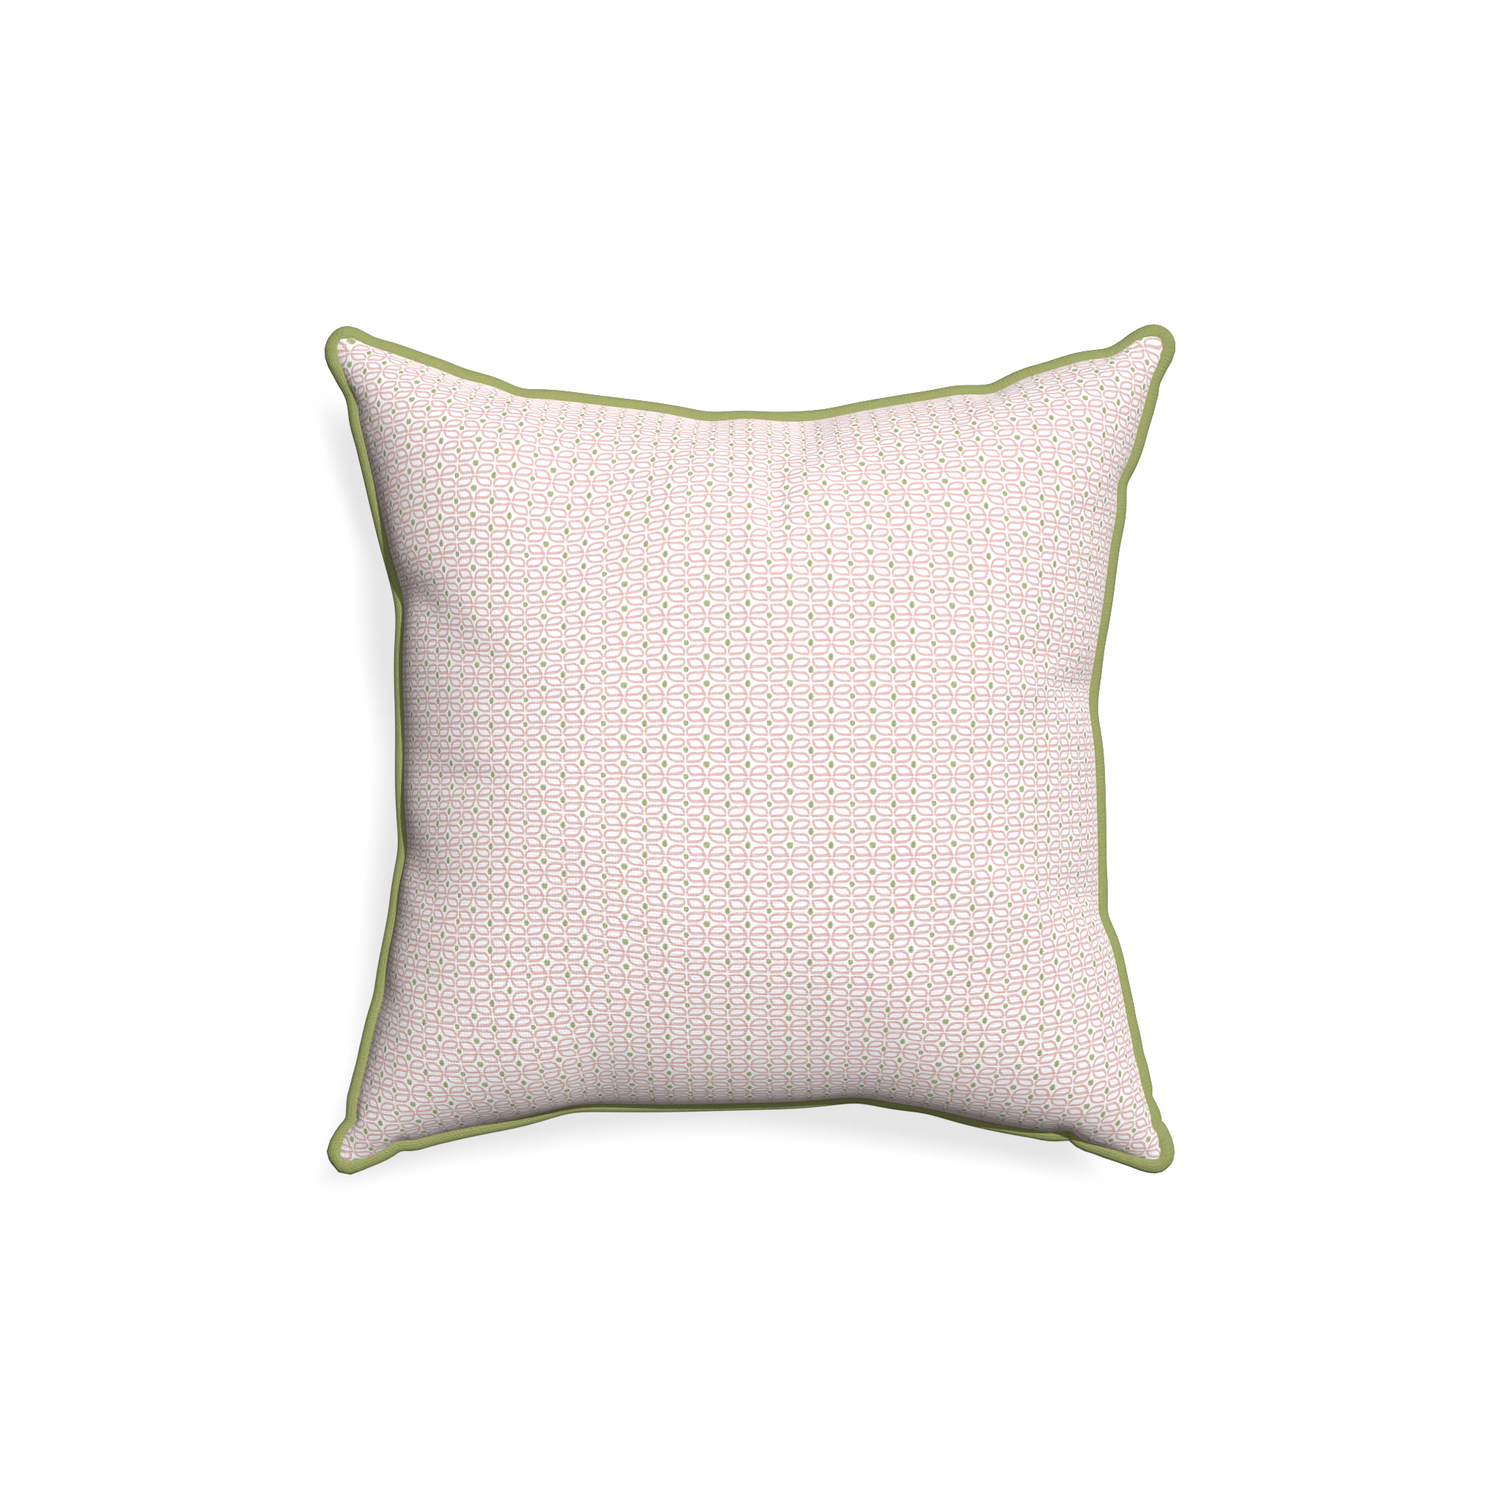 18-square loomi pink custom pillow with moss piping on white background